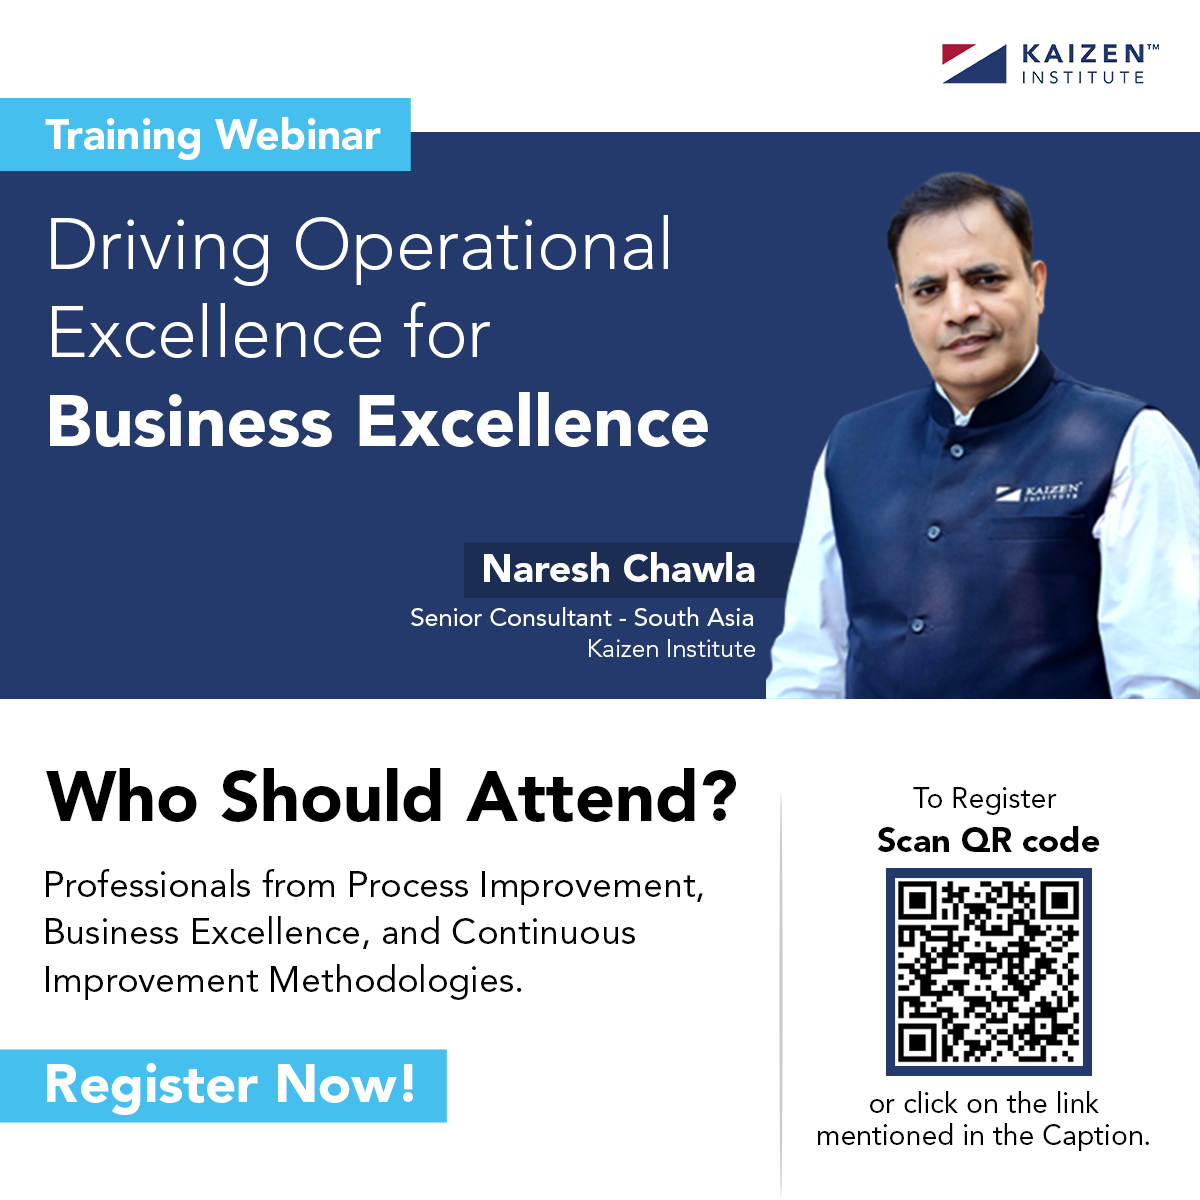 📣 Who Should Attend?

Calling all professionals from:
🔹 Process Improvement
🔹 Business Excellence
🔹 Continuous Improvement Methodologies

Join us on June 26th, 2023
Register now: bit.ly/3J7Lgvv

#Webinar #OperationalExcellence #BusinessExcellence #ProcessImprovement